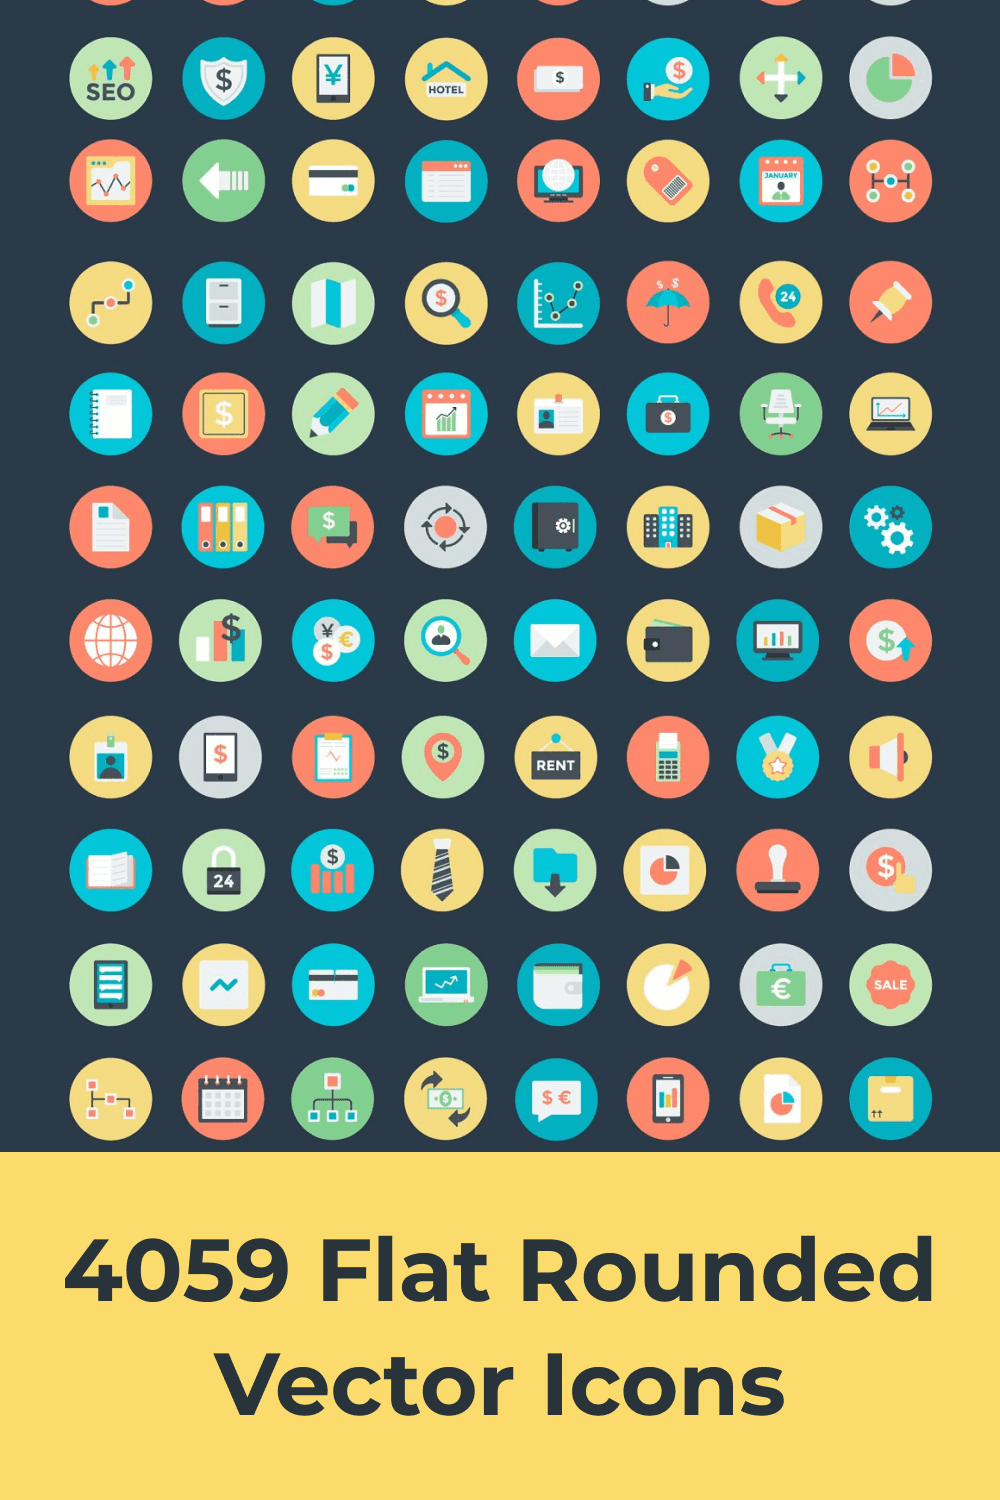 4059 Flat Rounded Vector Icons - Pinterest.